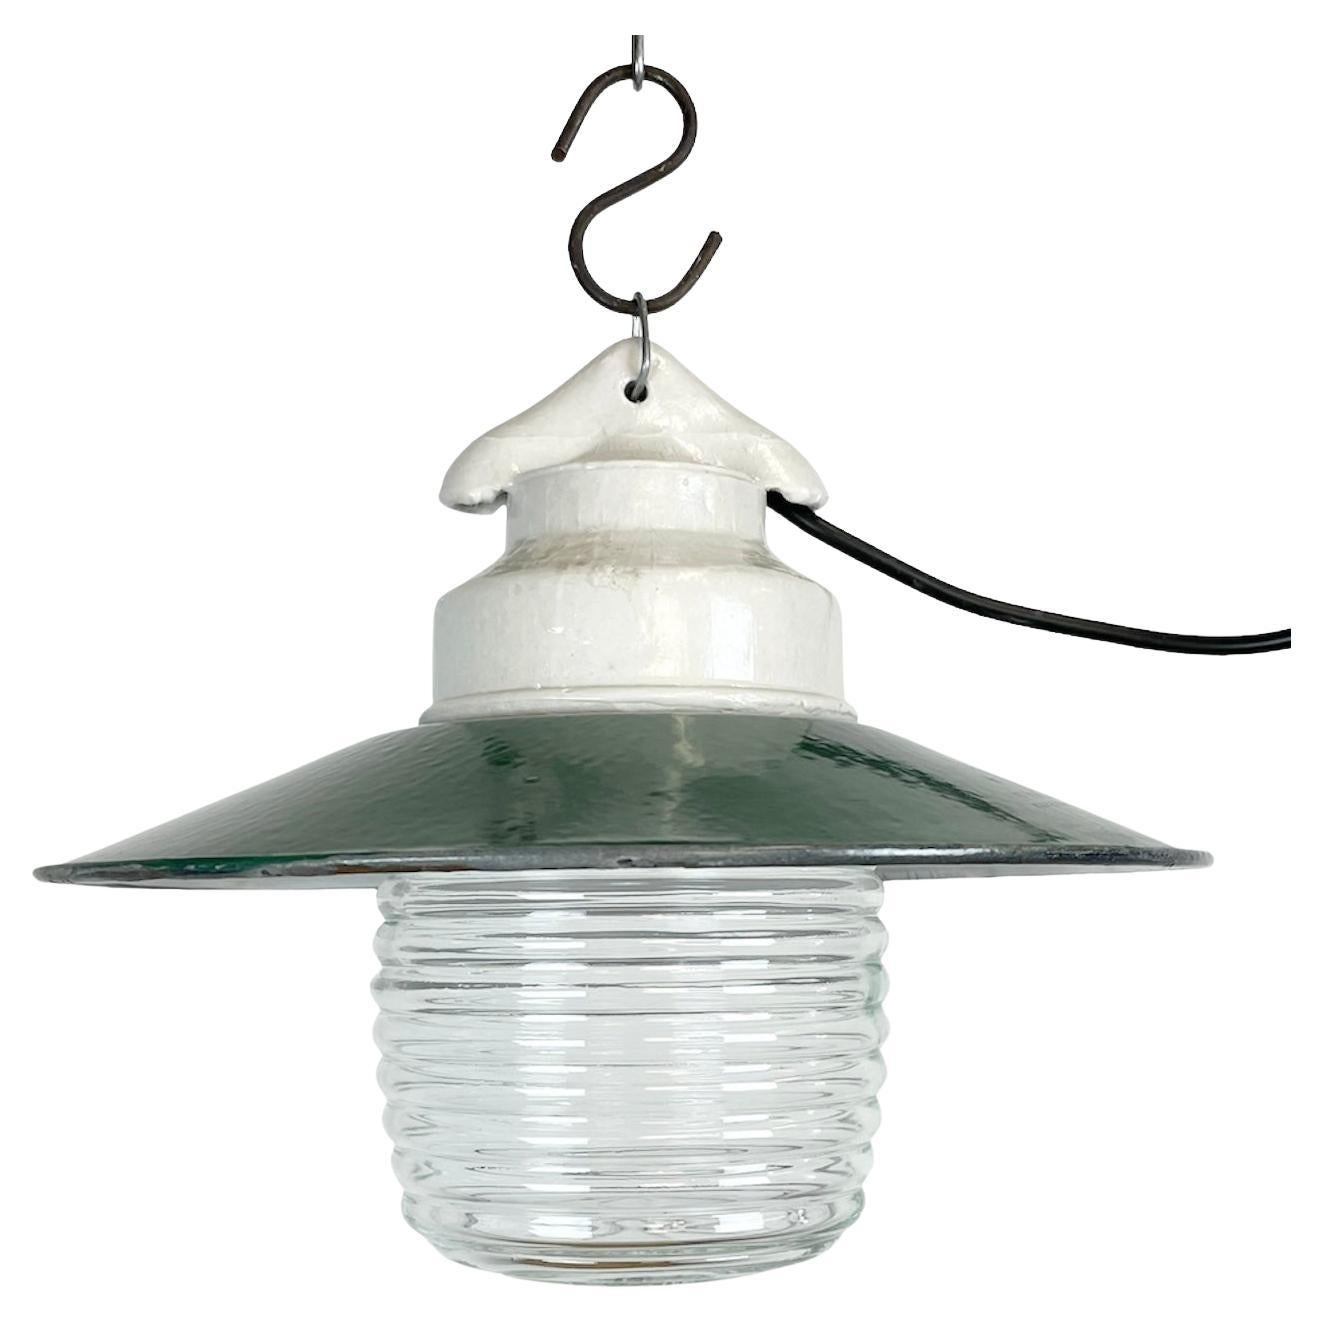 Industrial Porcelain Green Enamel Pendant Light with Ribbed Clear Glass, 1970s